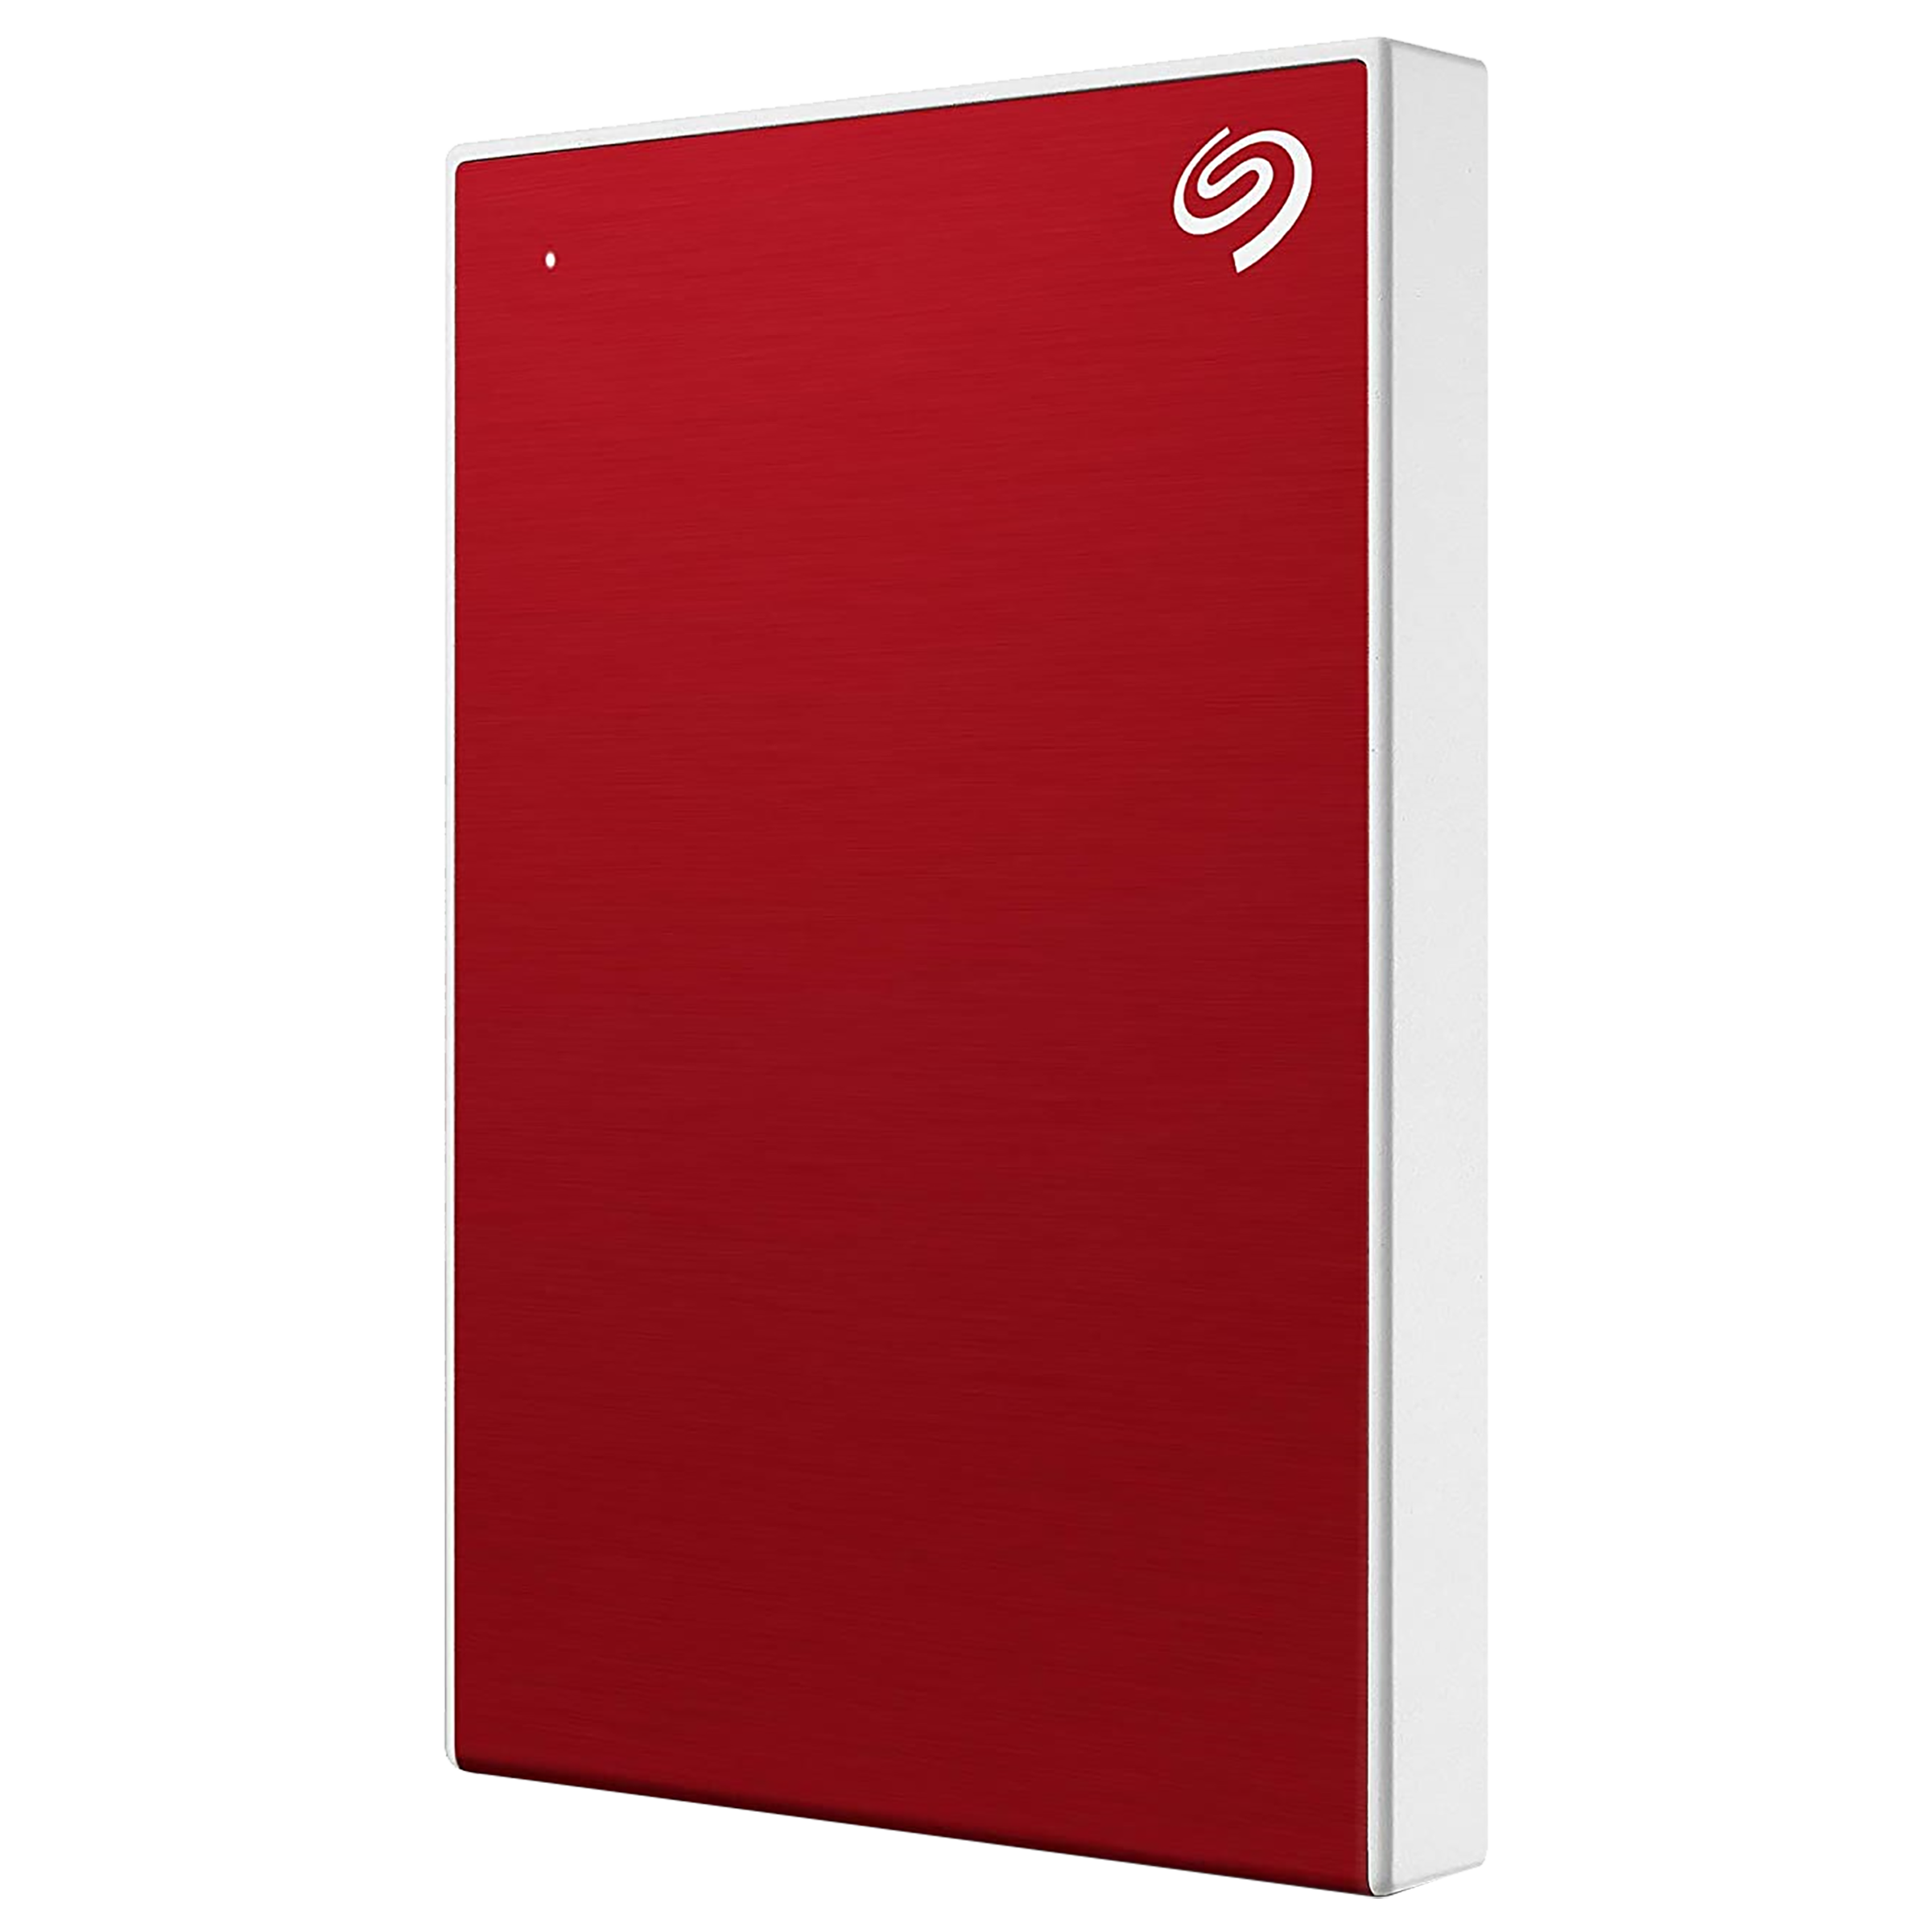 Seagate One Touch 2TB USB 3.0 Hard Disk Drive (Advanced Password Protection, STKY2000403, Red)